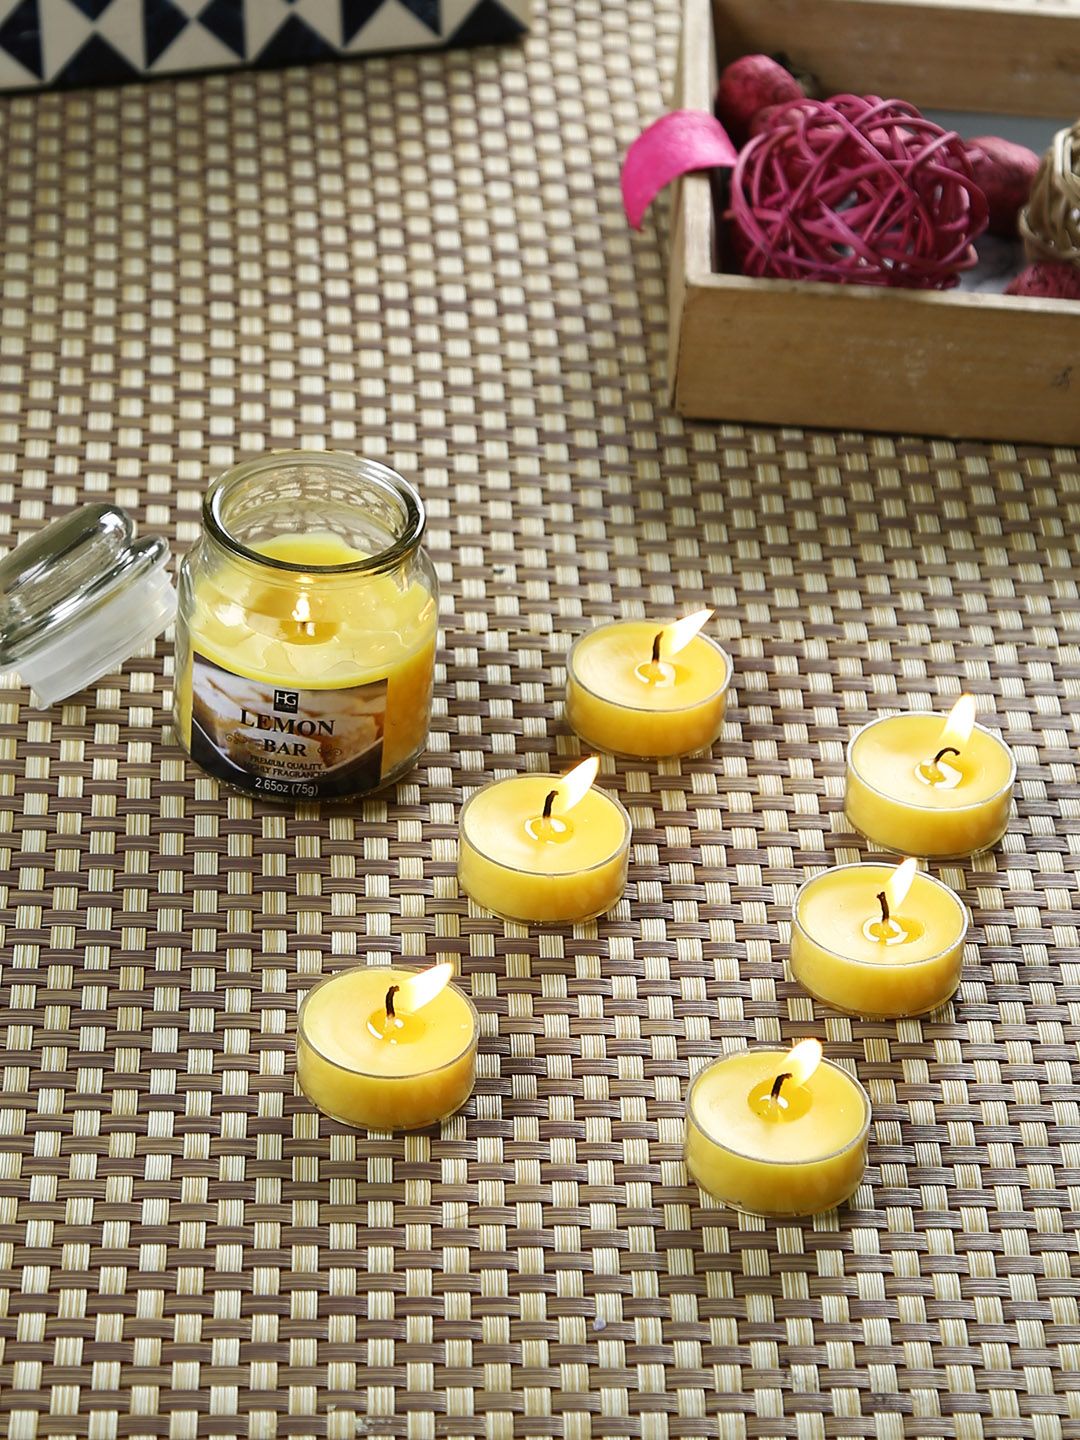 HOSLEY Set of 7 Yellow Lemon Bar Scented Jar Candle With Tealights Price in India